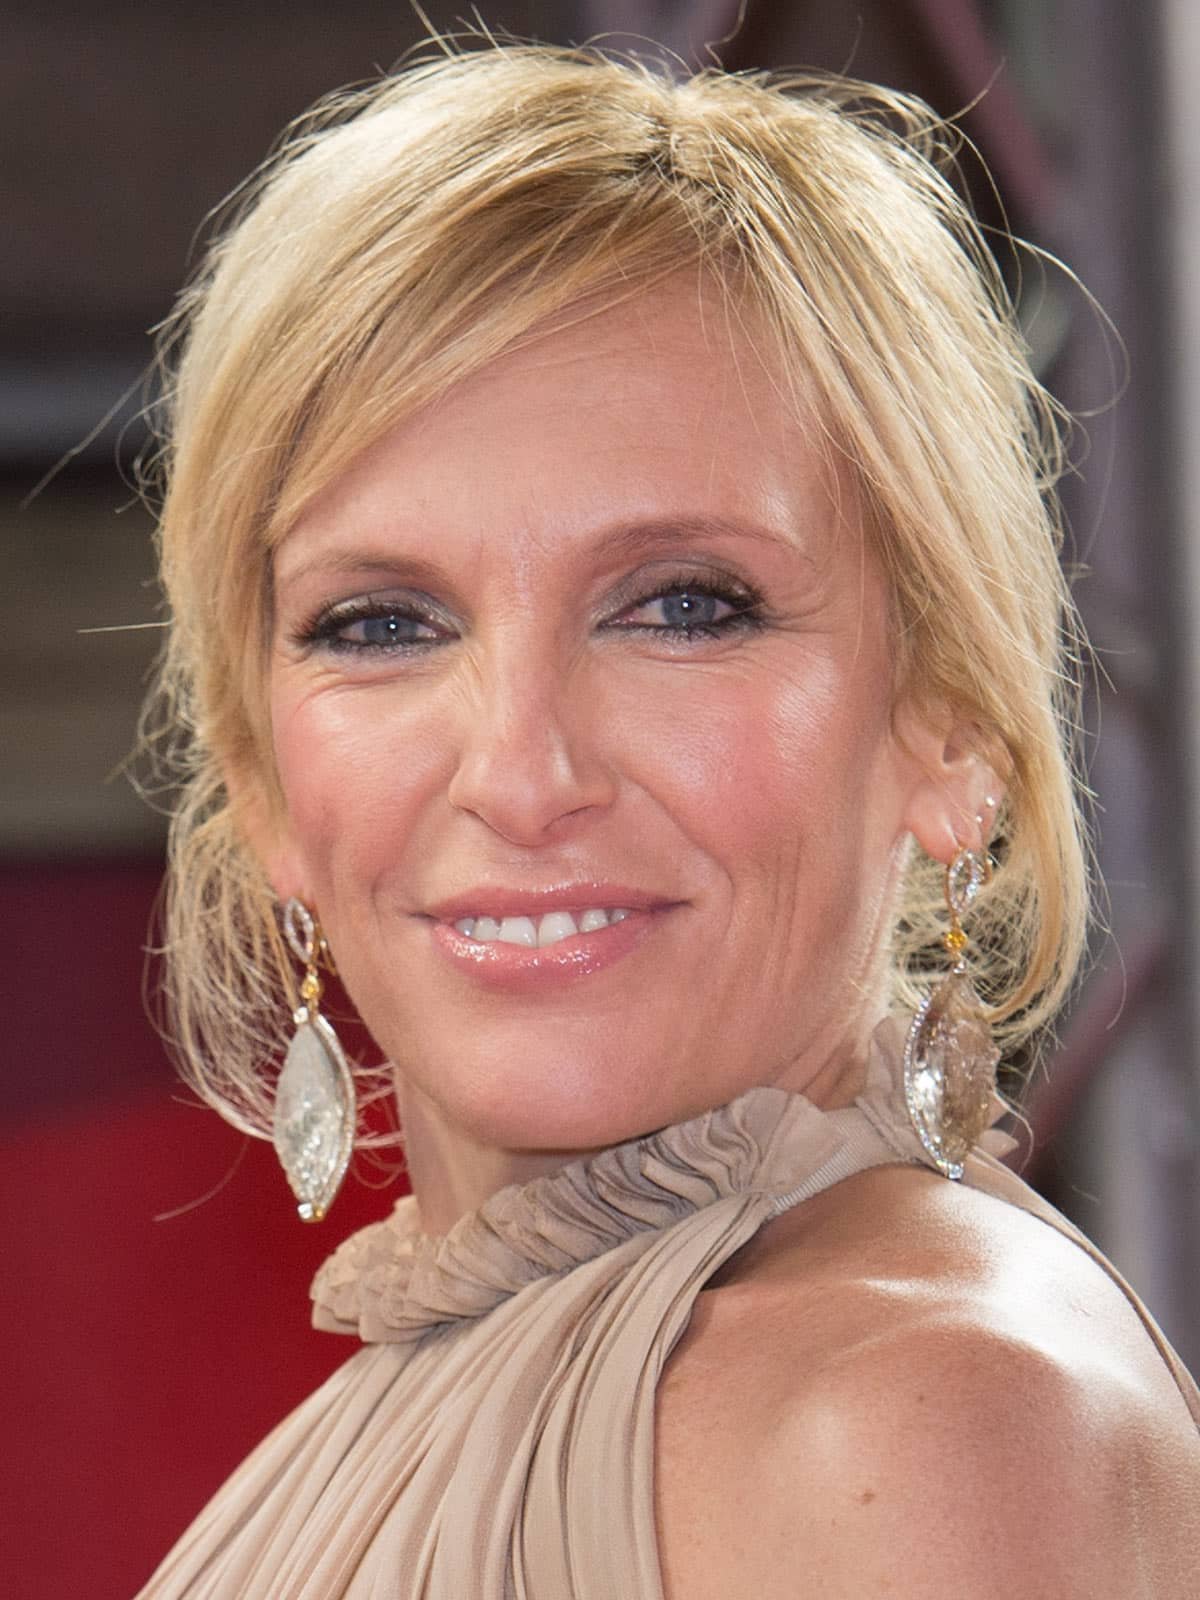 Peces of Her Netflix Cast: Toni Collette as Laura Oliver in Pieces of Her Netflix